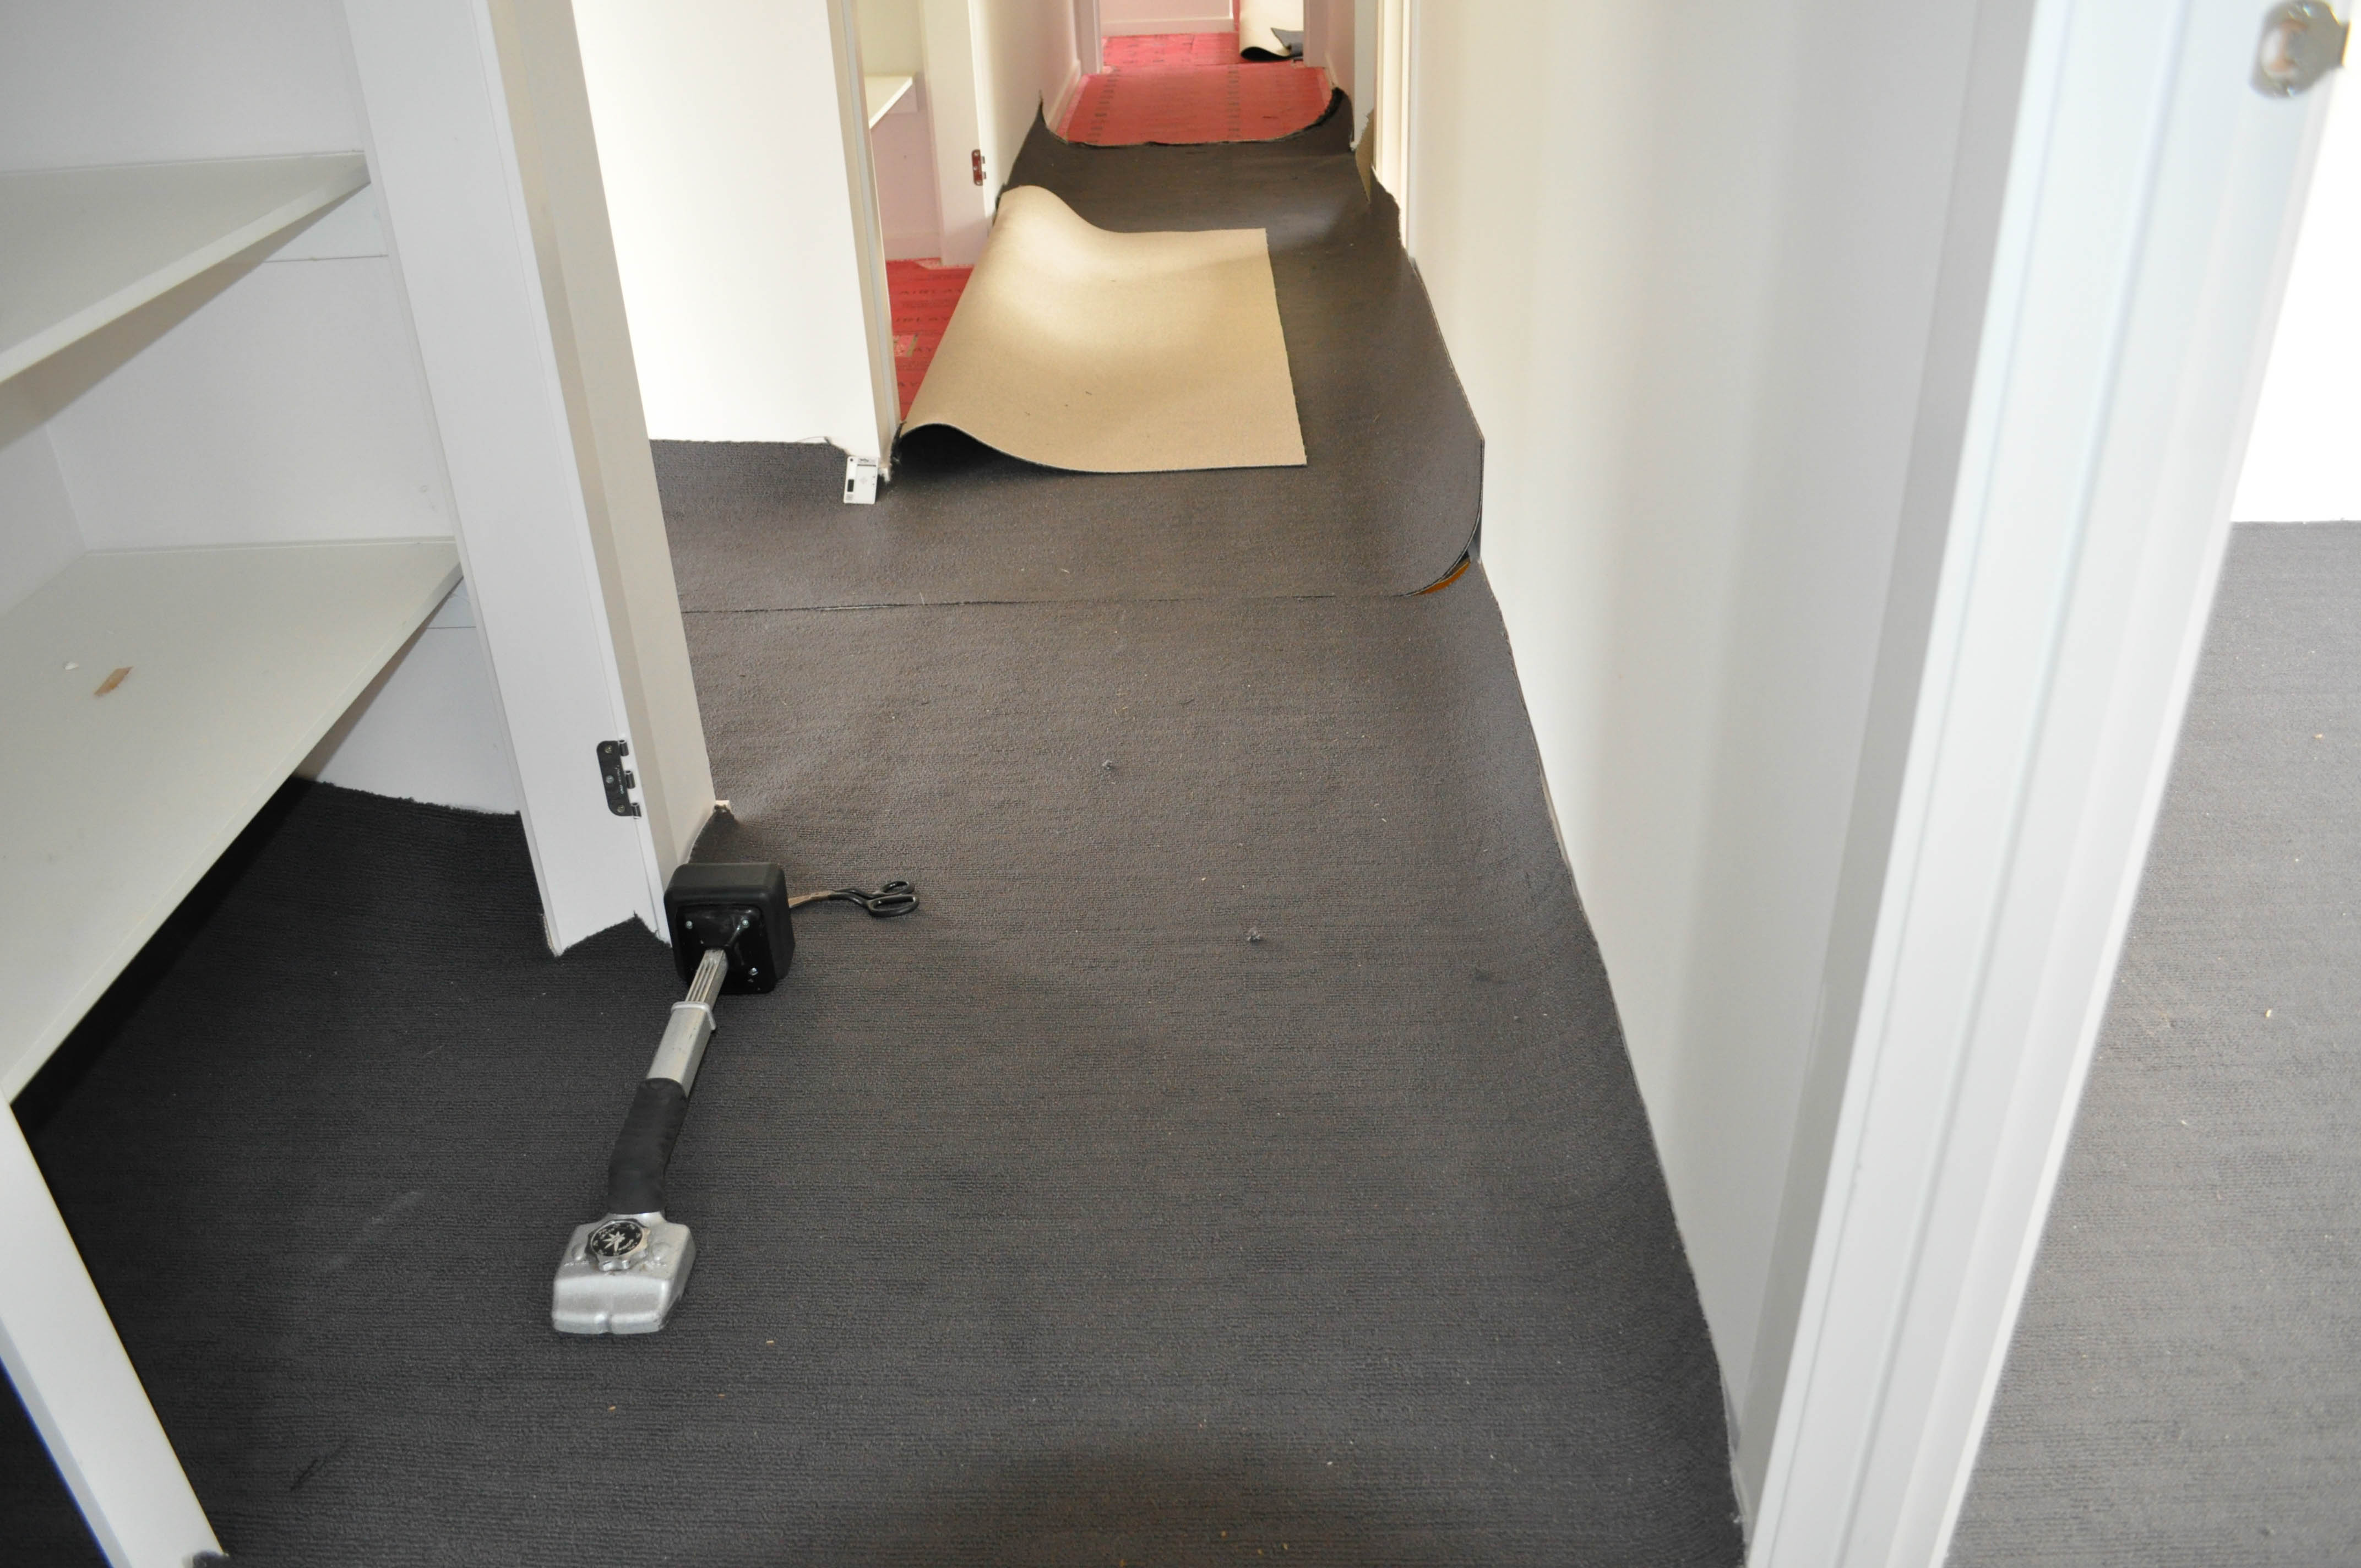 slabs of carpet in a passage prepared for joining by Concord Floors in a house in Werribee, Vic 3030.